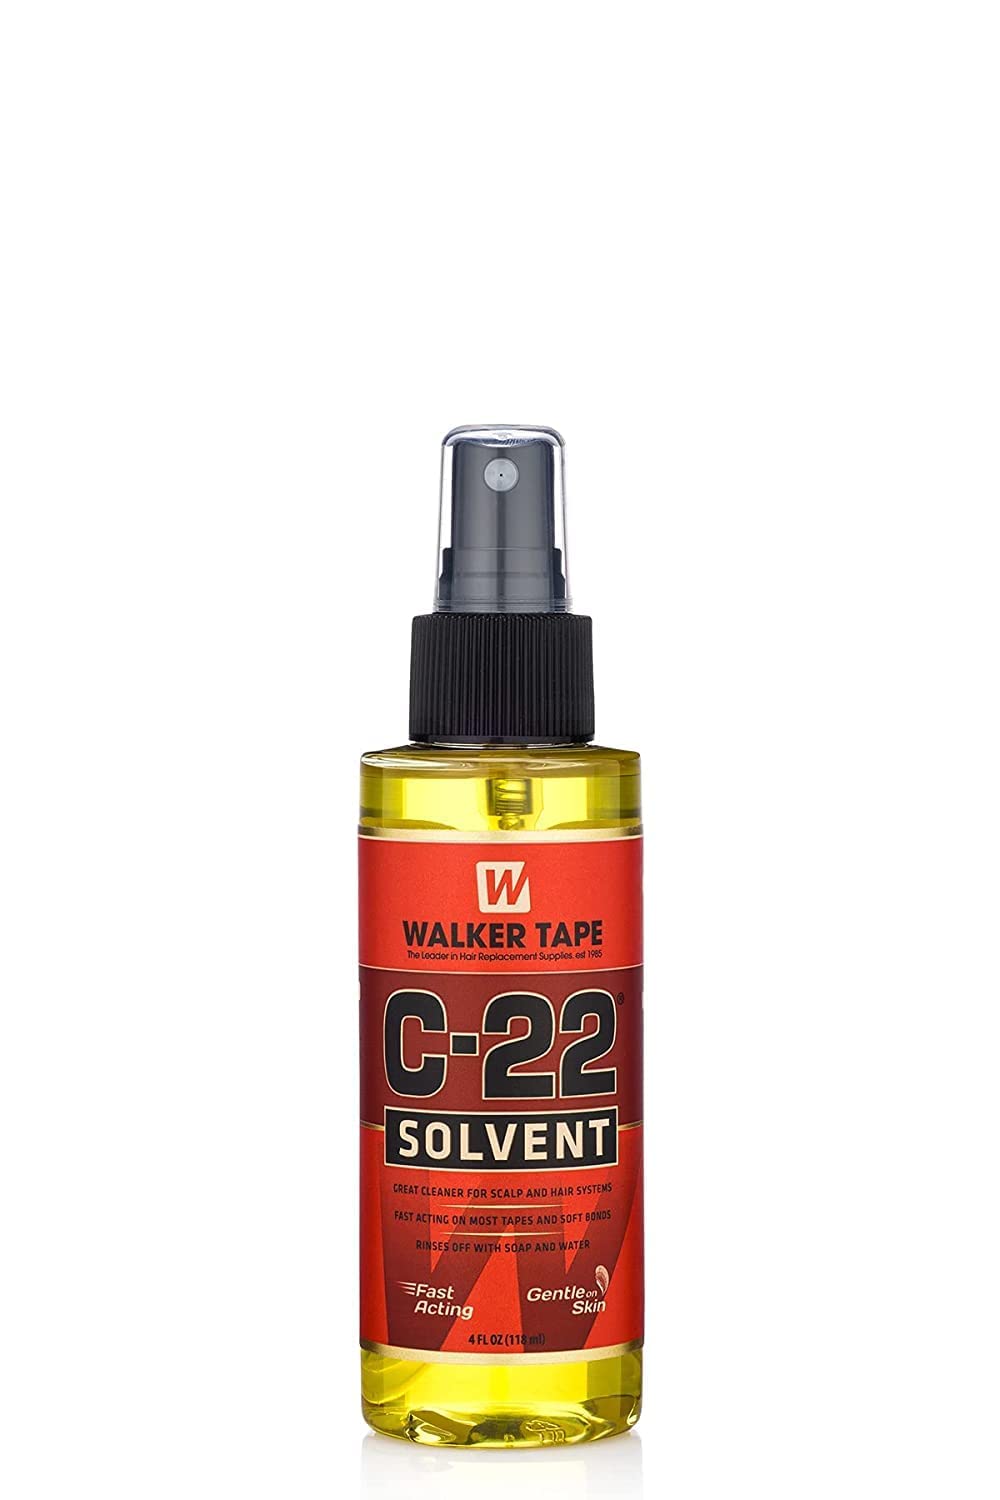 Ritzkart C22 Solvent Wig Glue Remover 4Oz (118ml) Spray For Lace Wigs & Toupees. Used for Hair Patch tape and adhesive remover